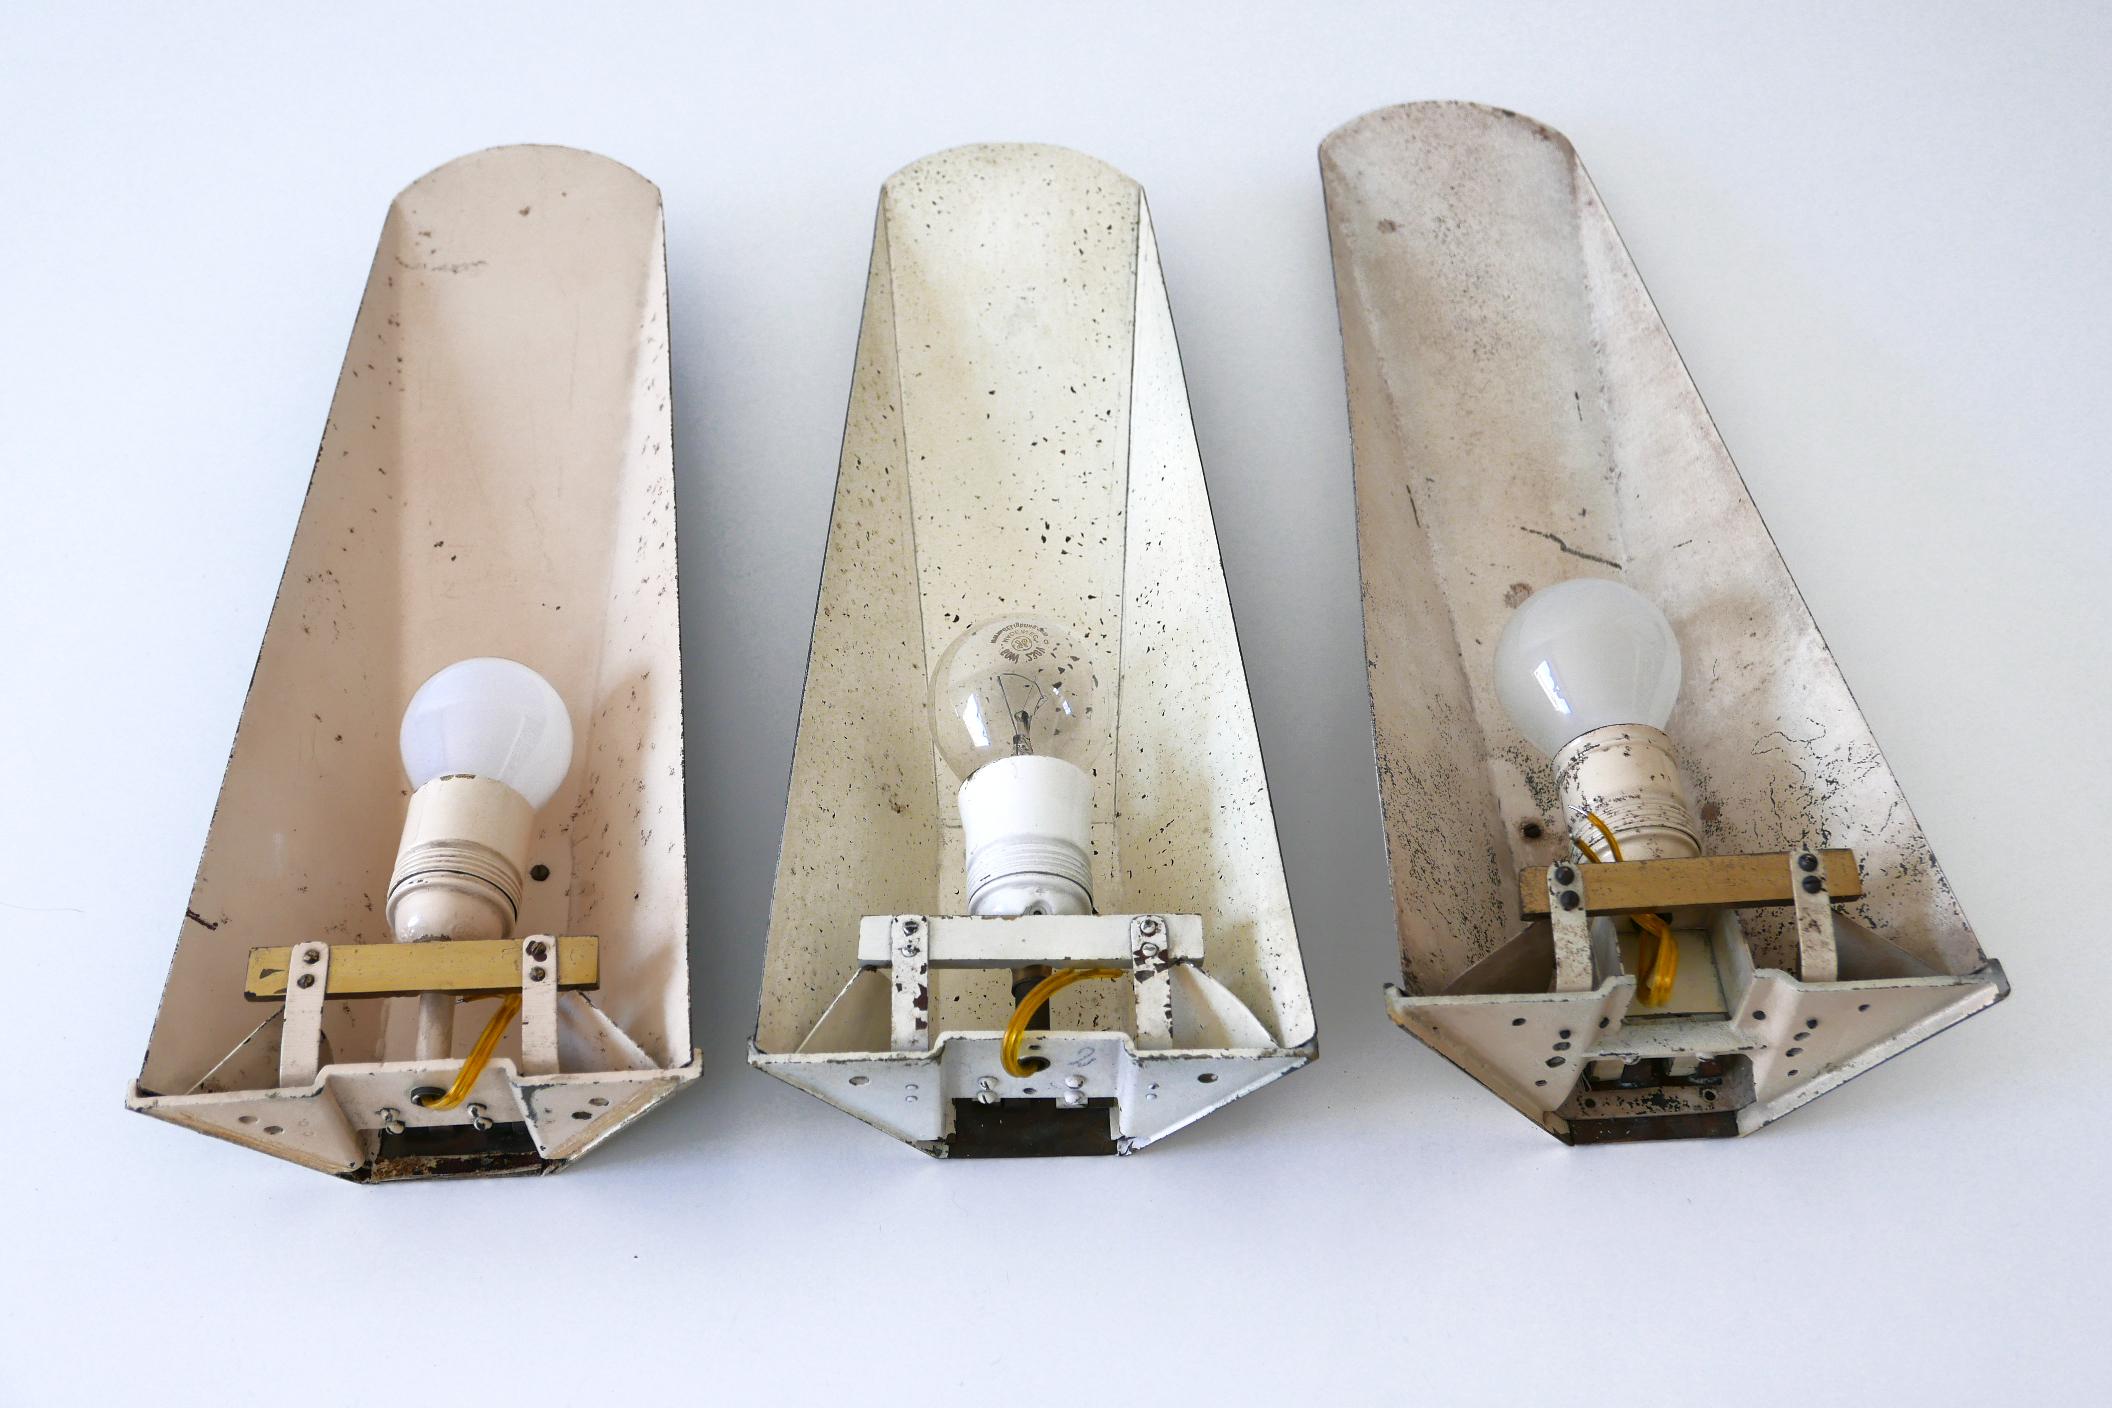 Set of Three Large Mid-Century Modern Wall Lamps or Sconces, 1950s, Germany For Sale 10